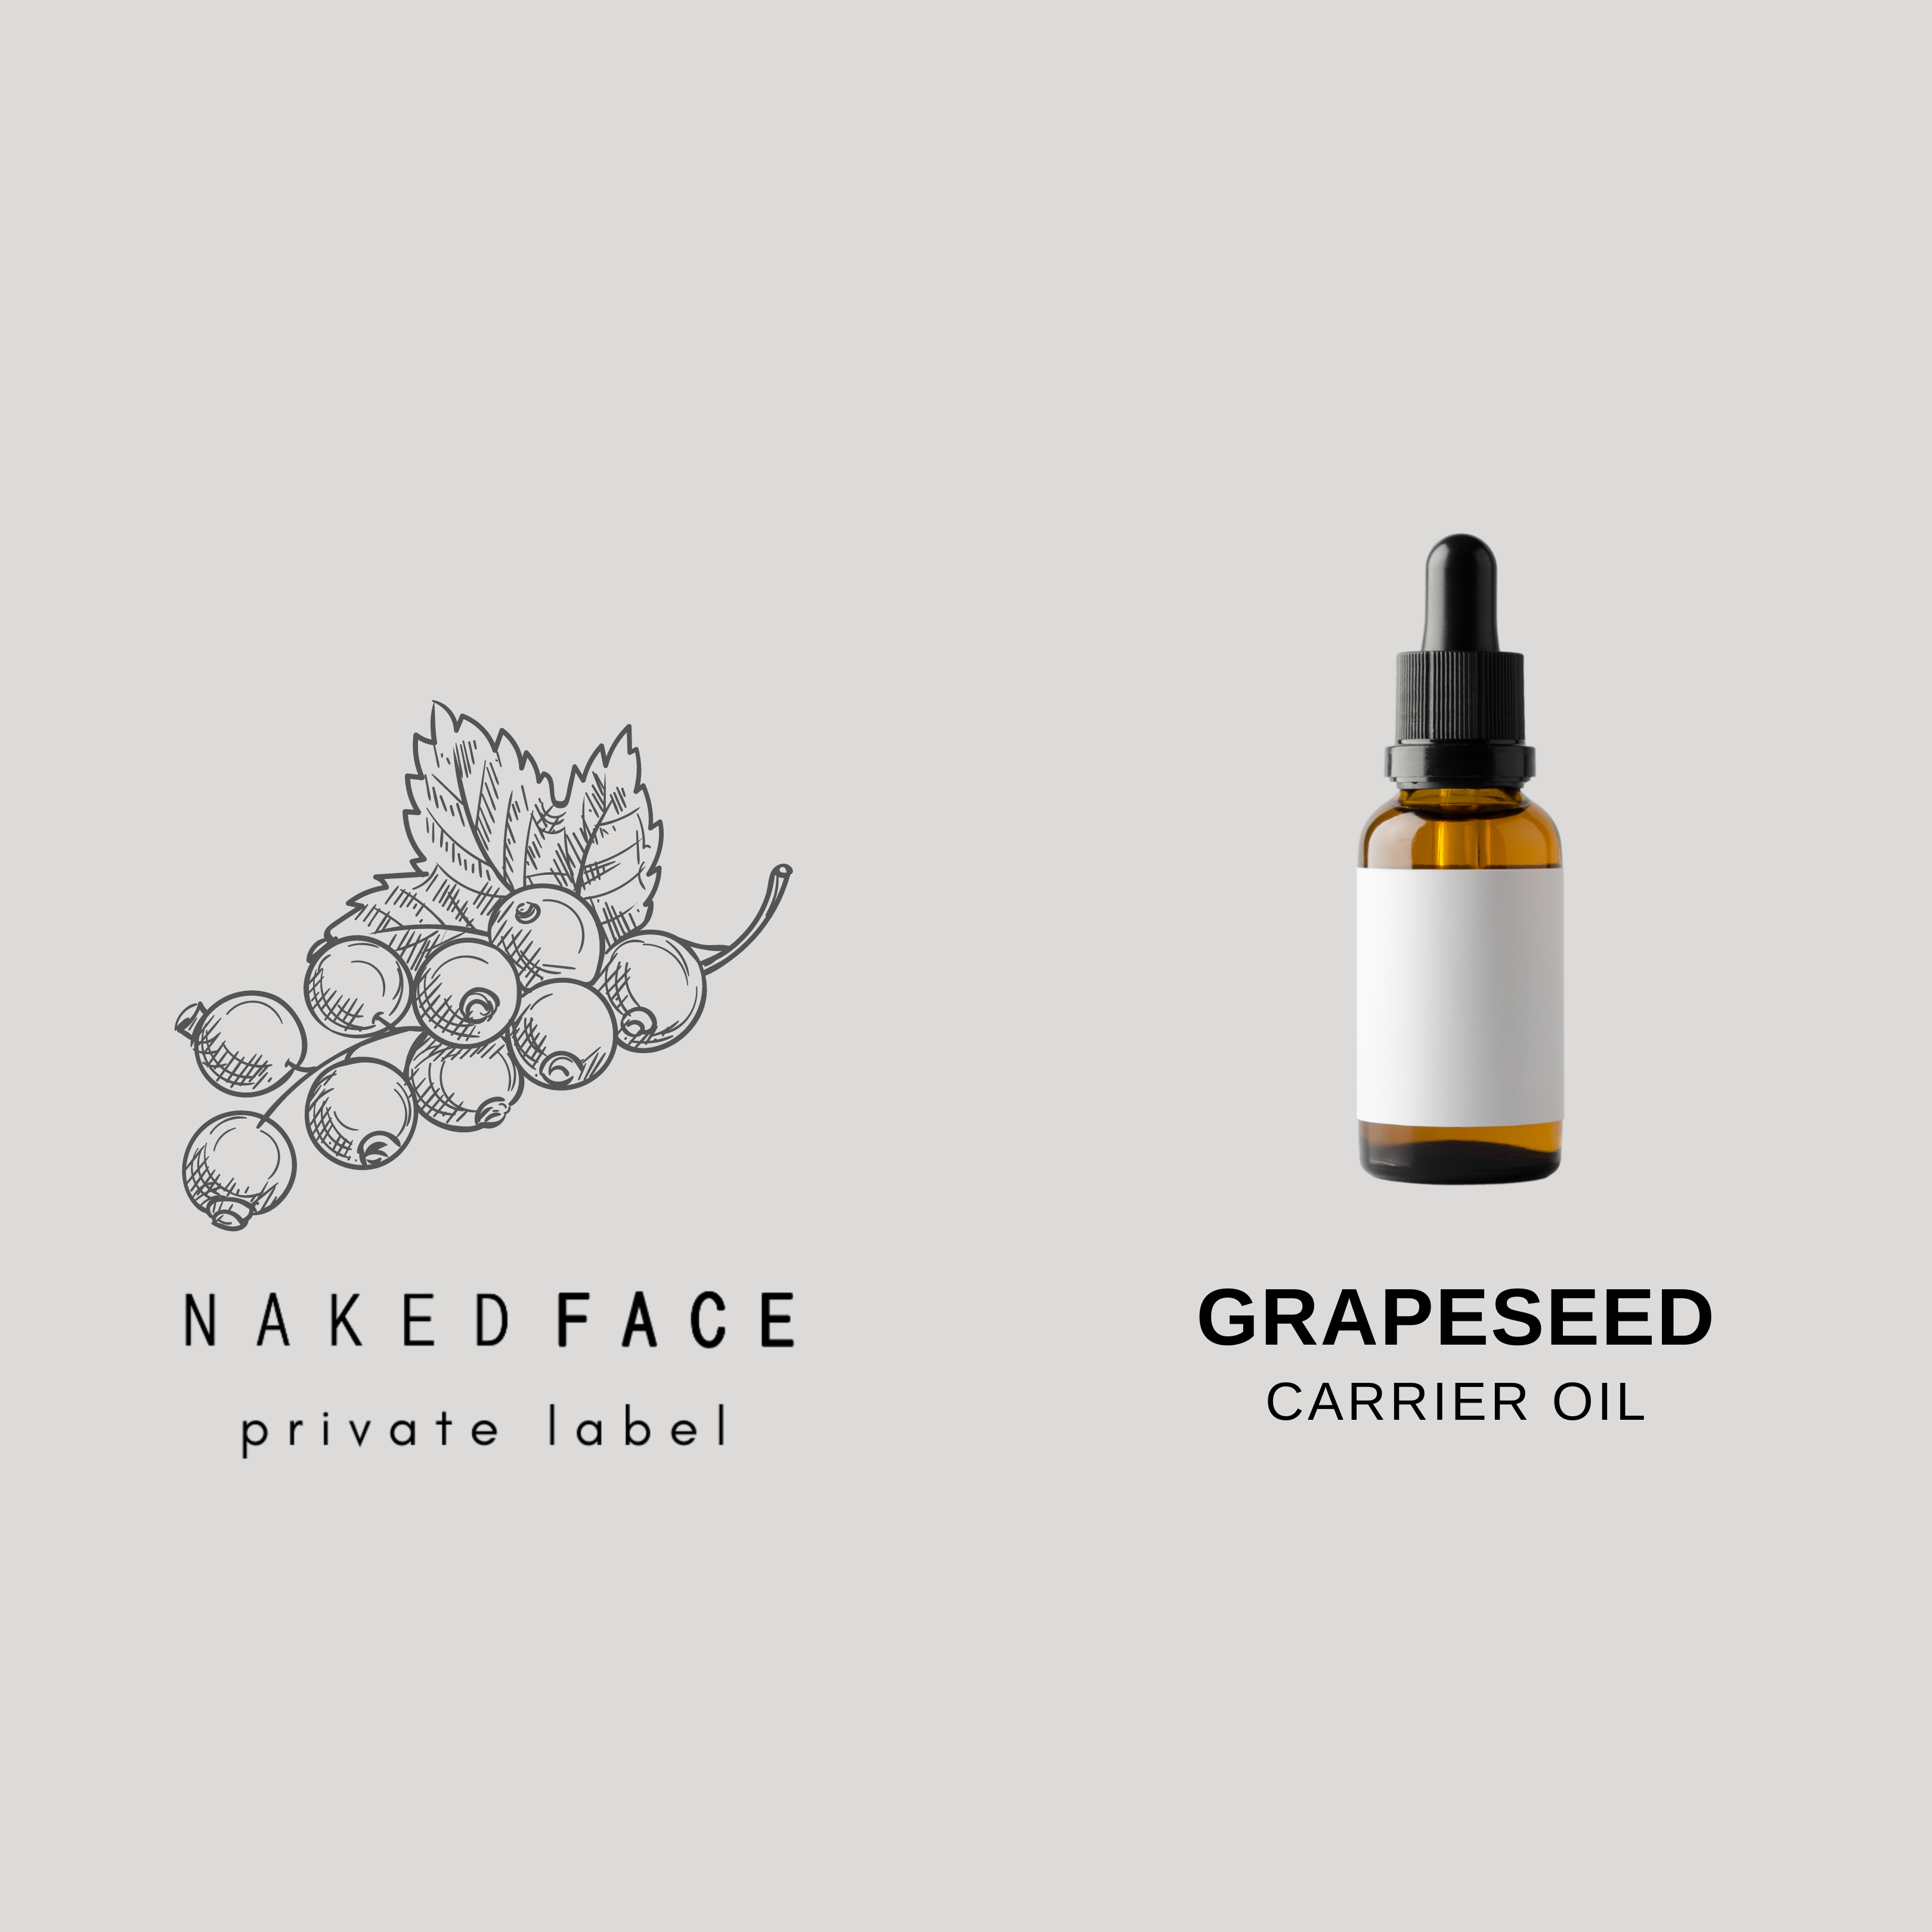 Grapeseed cosmetic grade oil is obtained from the seeds of Grape (Vitis vinifera) by cold pressing, refining, and standardizing with non-GMO vegetable oils to enhance their oxidation stability. 